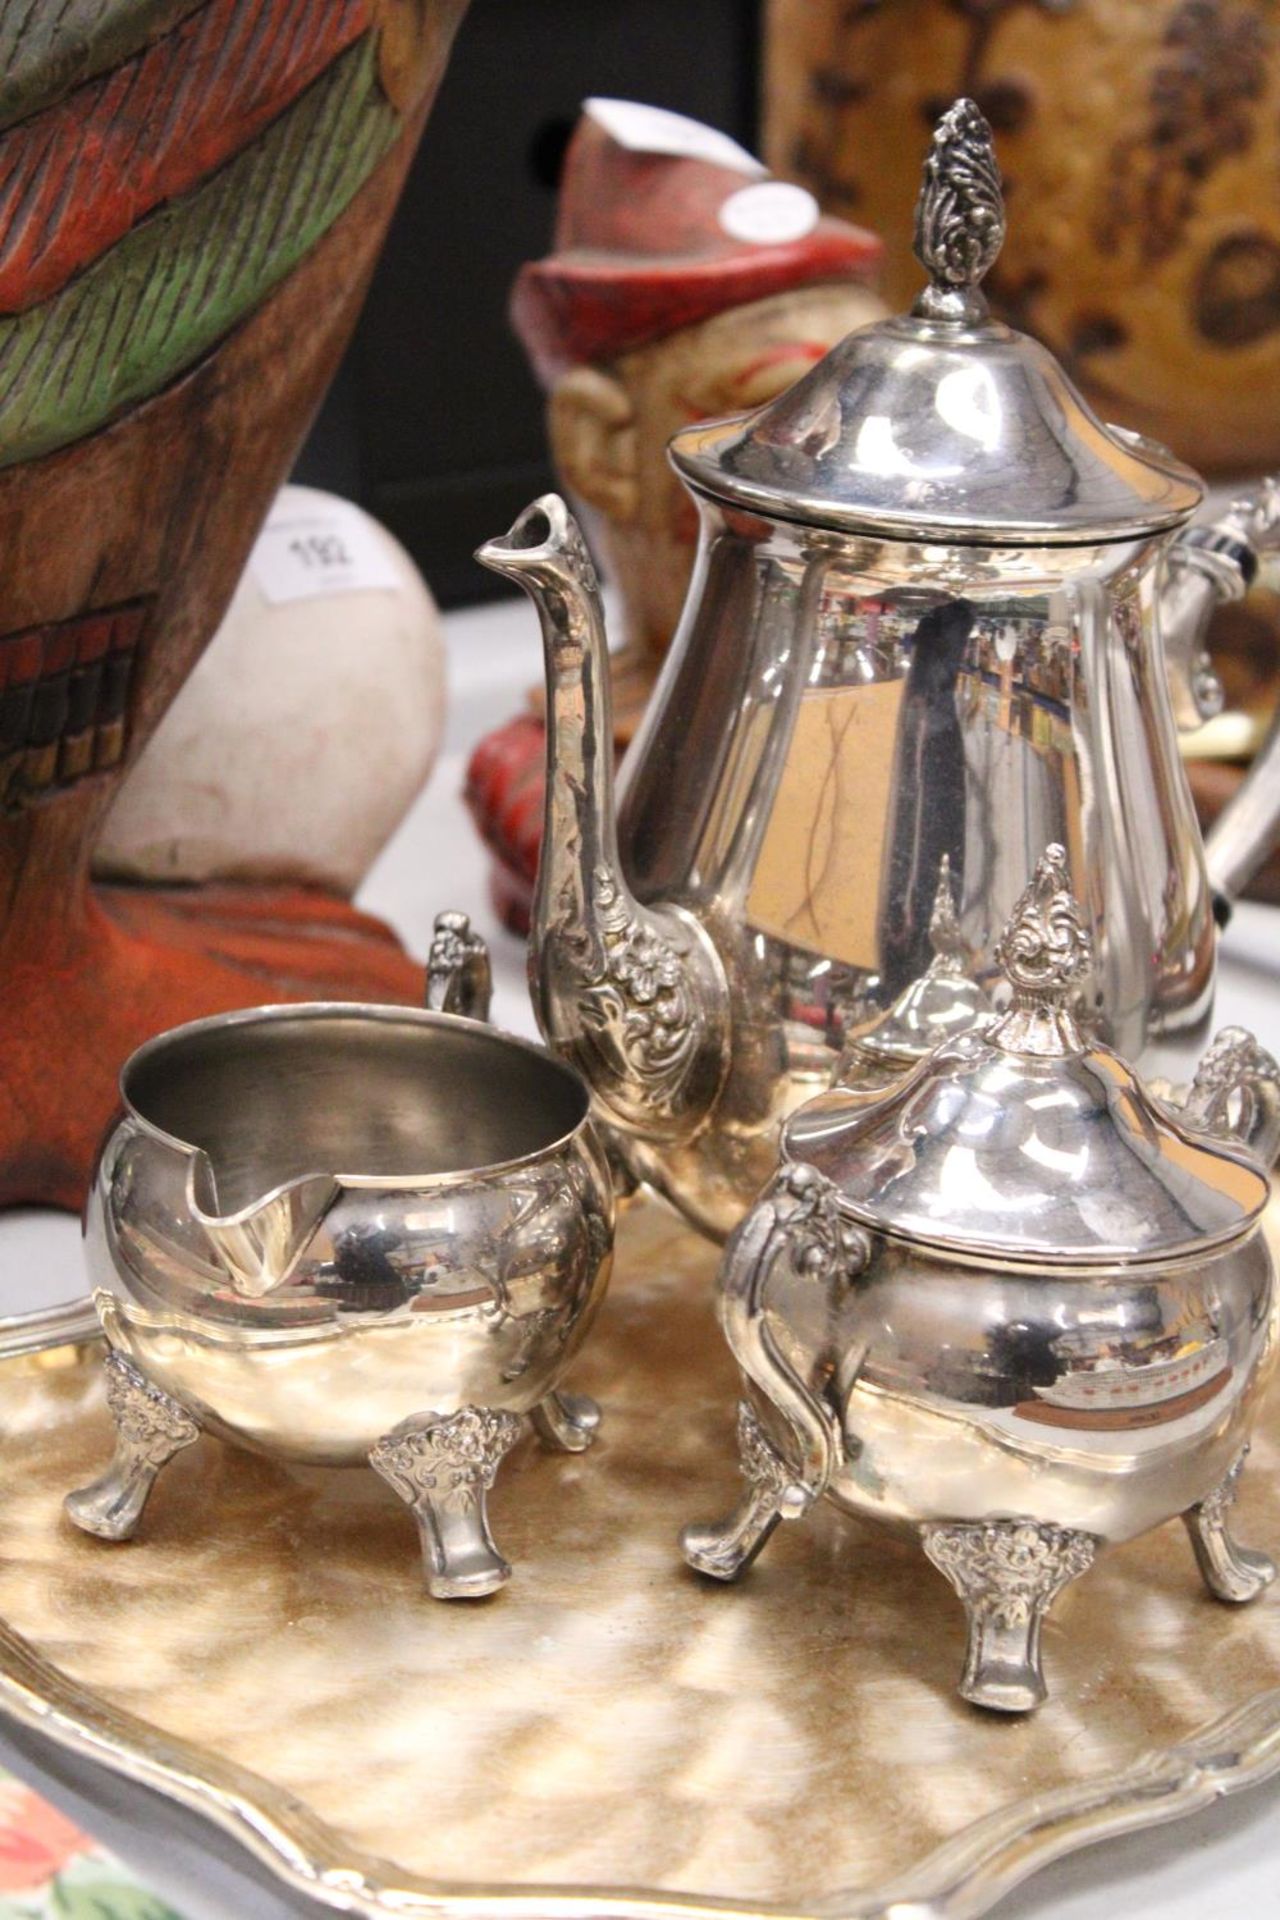 A VINTAGE SILVER PLATED COFFEE POT, MILK JUG AND SUGAR BOWL ON A TRAY - Image 3 of 4